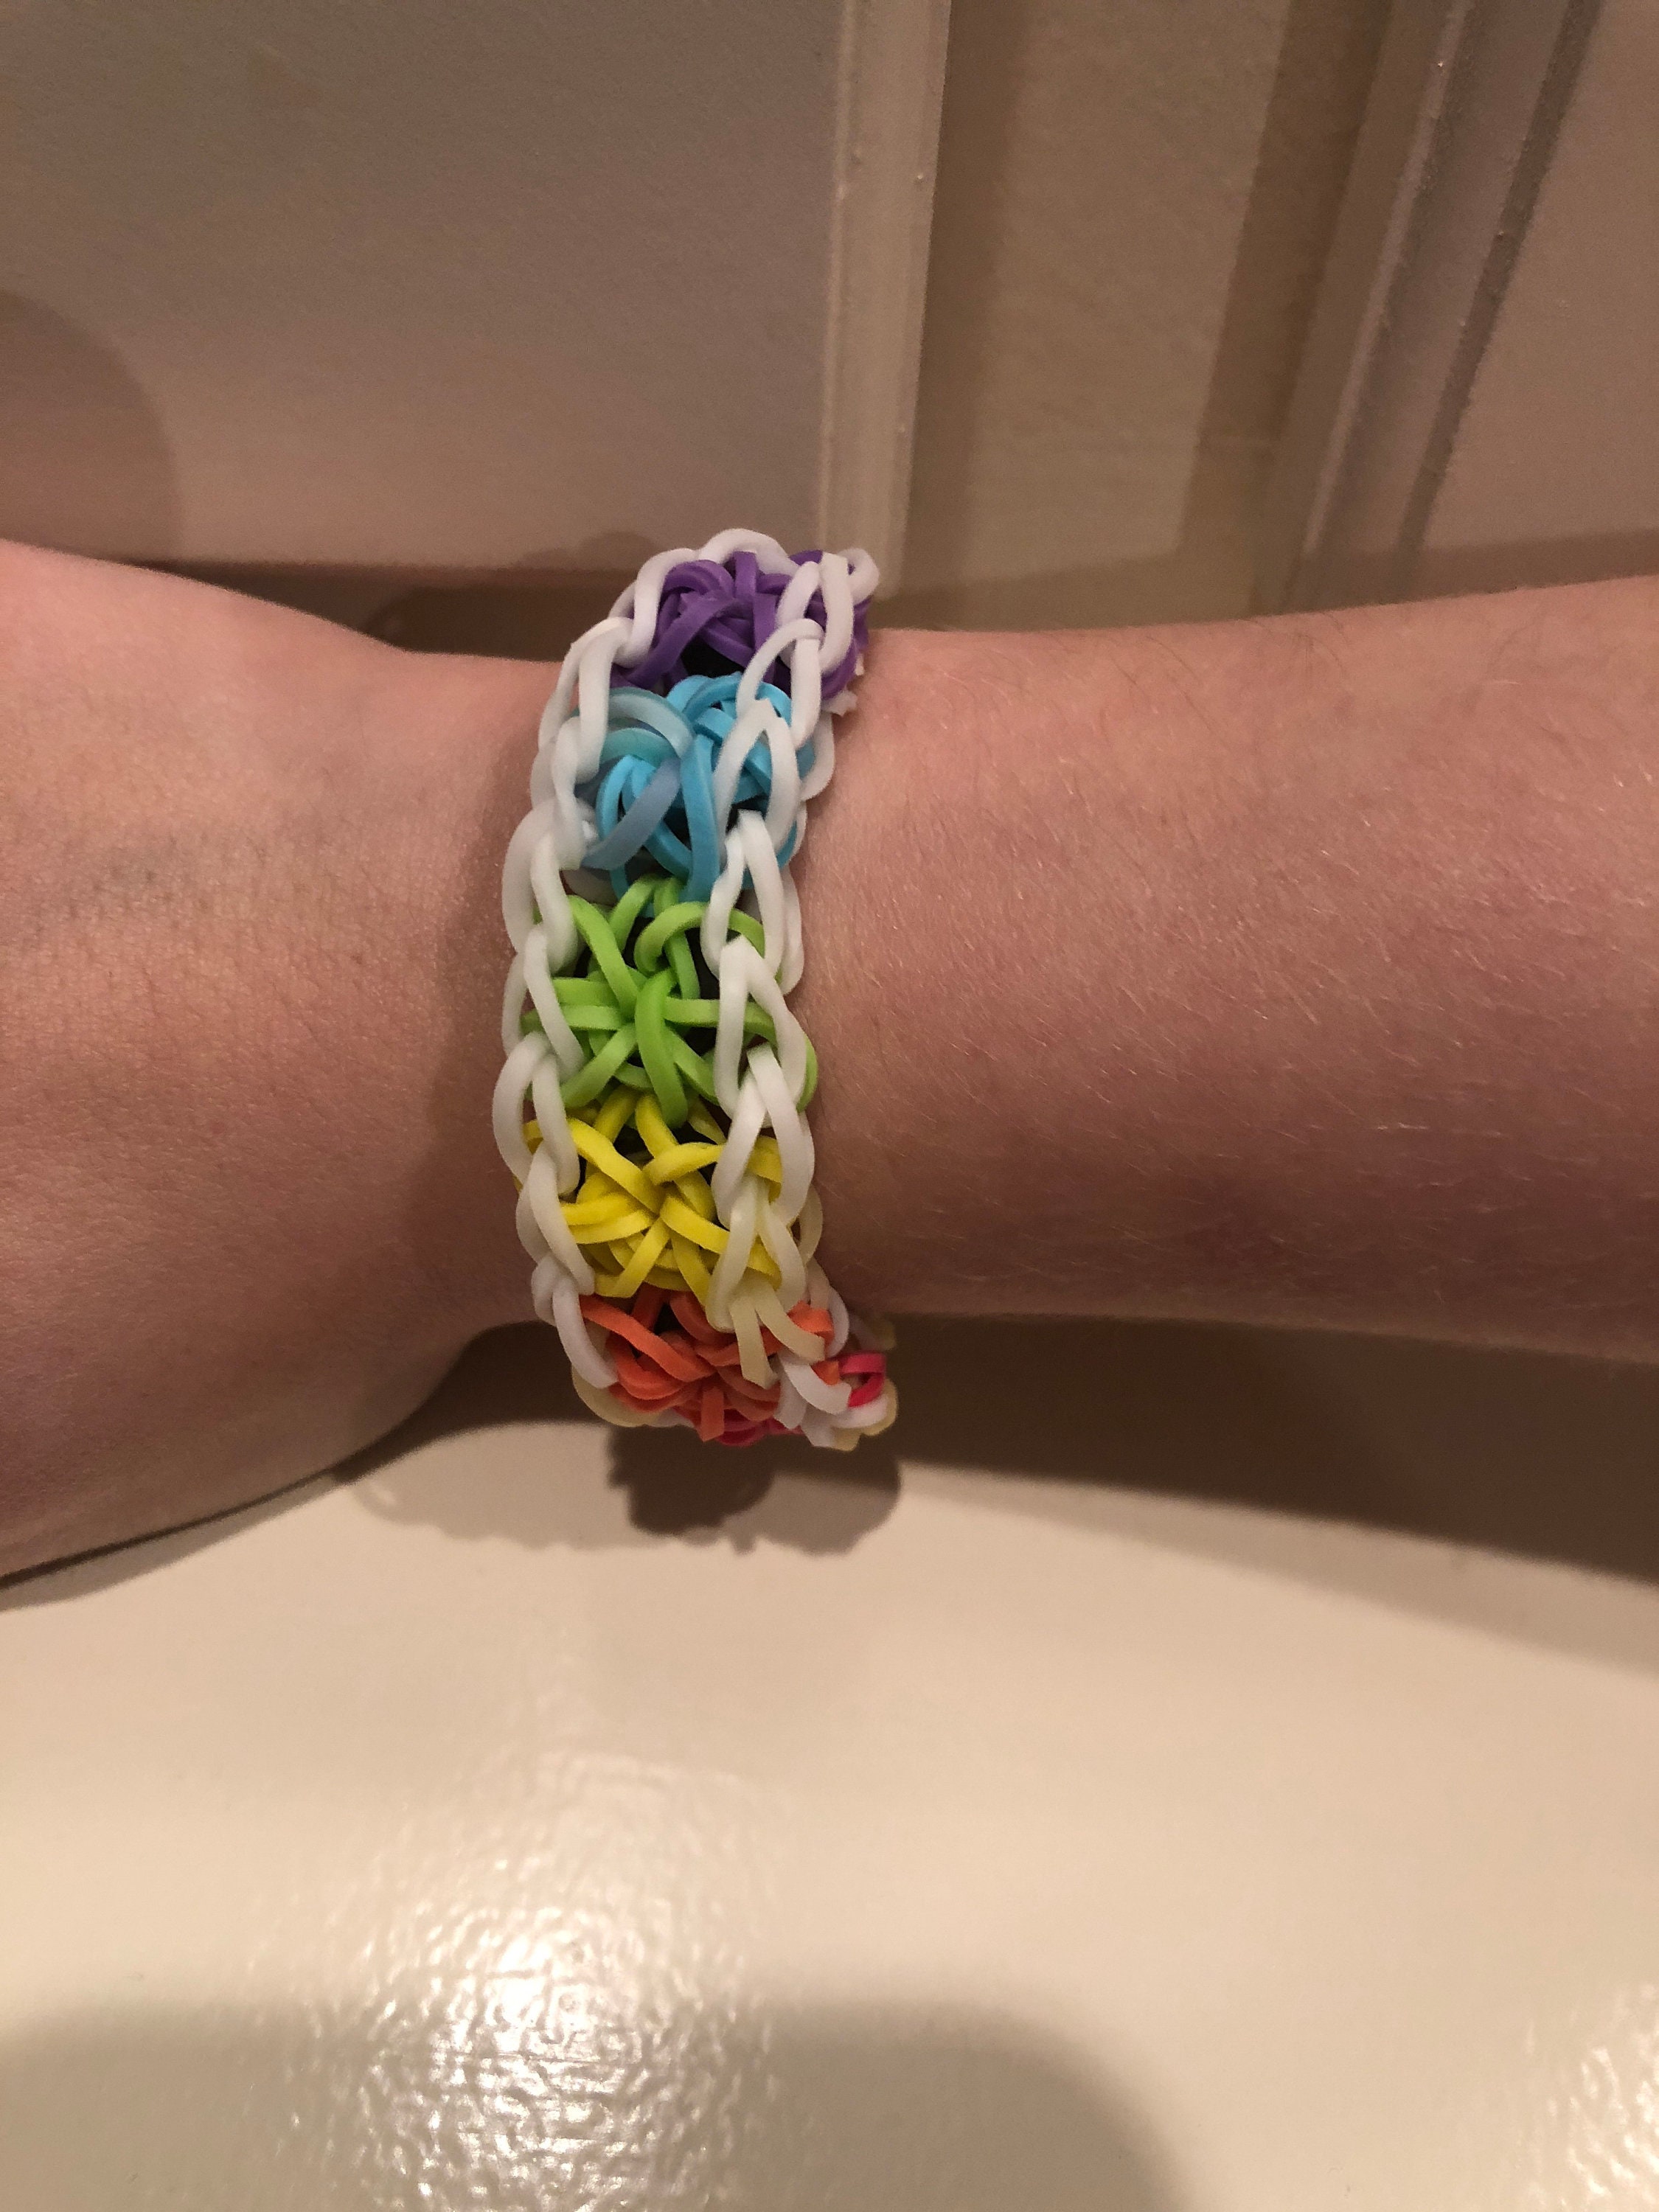 Rainbow Tire Track Black and White Rainbow Loom Rubber Band Bracelet Loom  Bands Craft Kids Jewelry Kit Stretchy Pride Loom Colorful Gift 